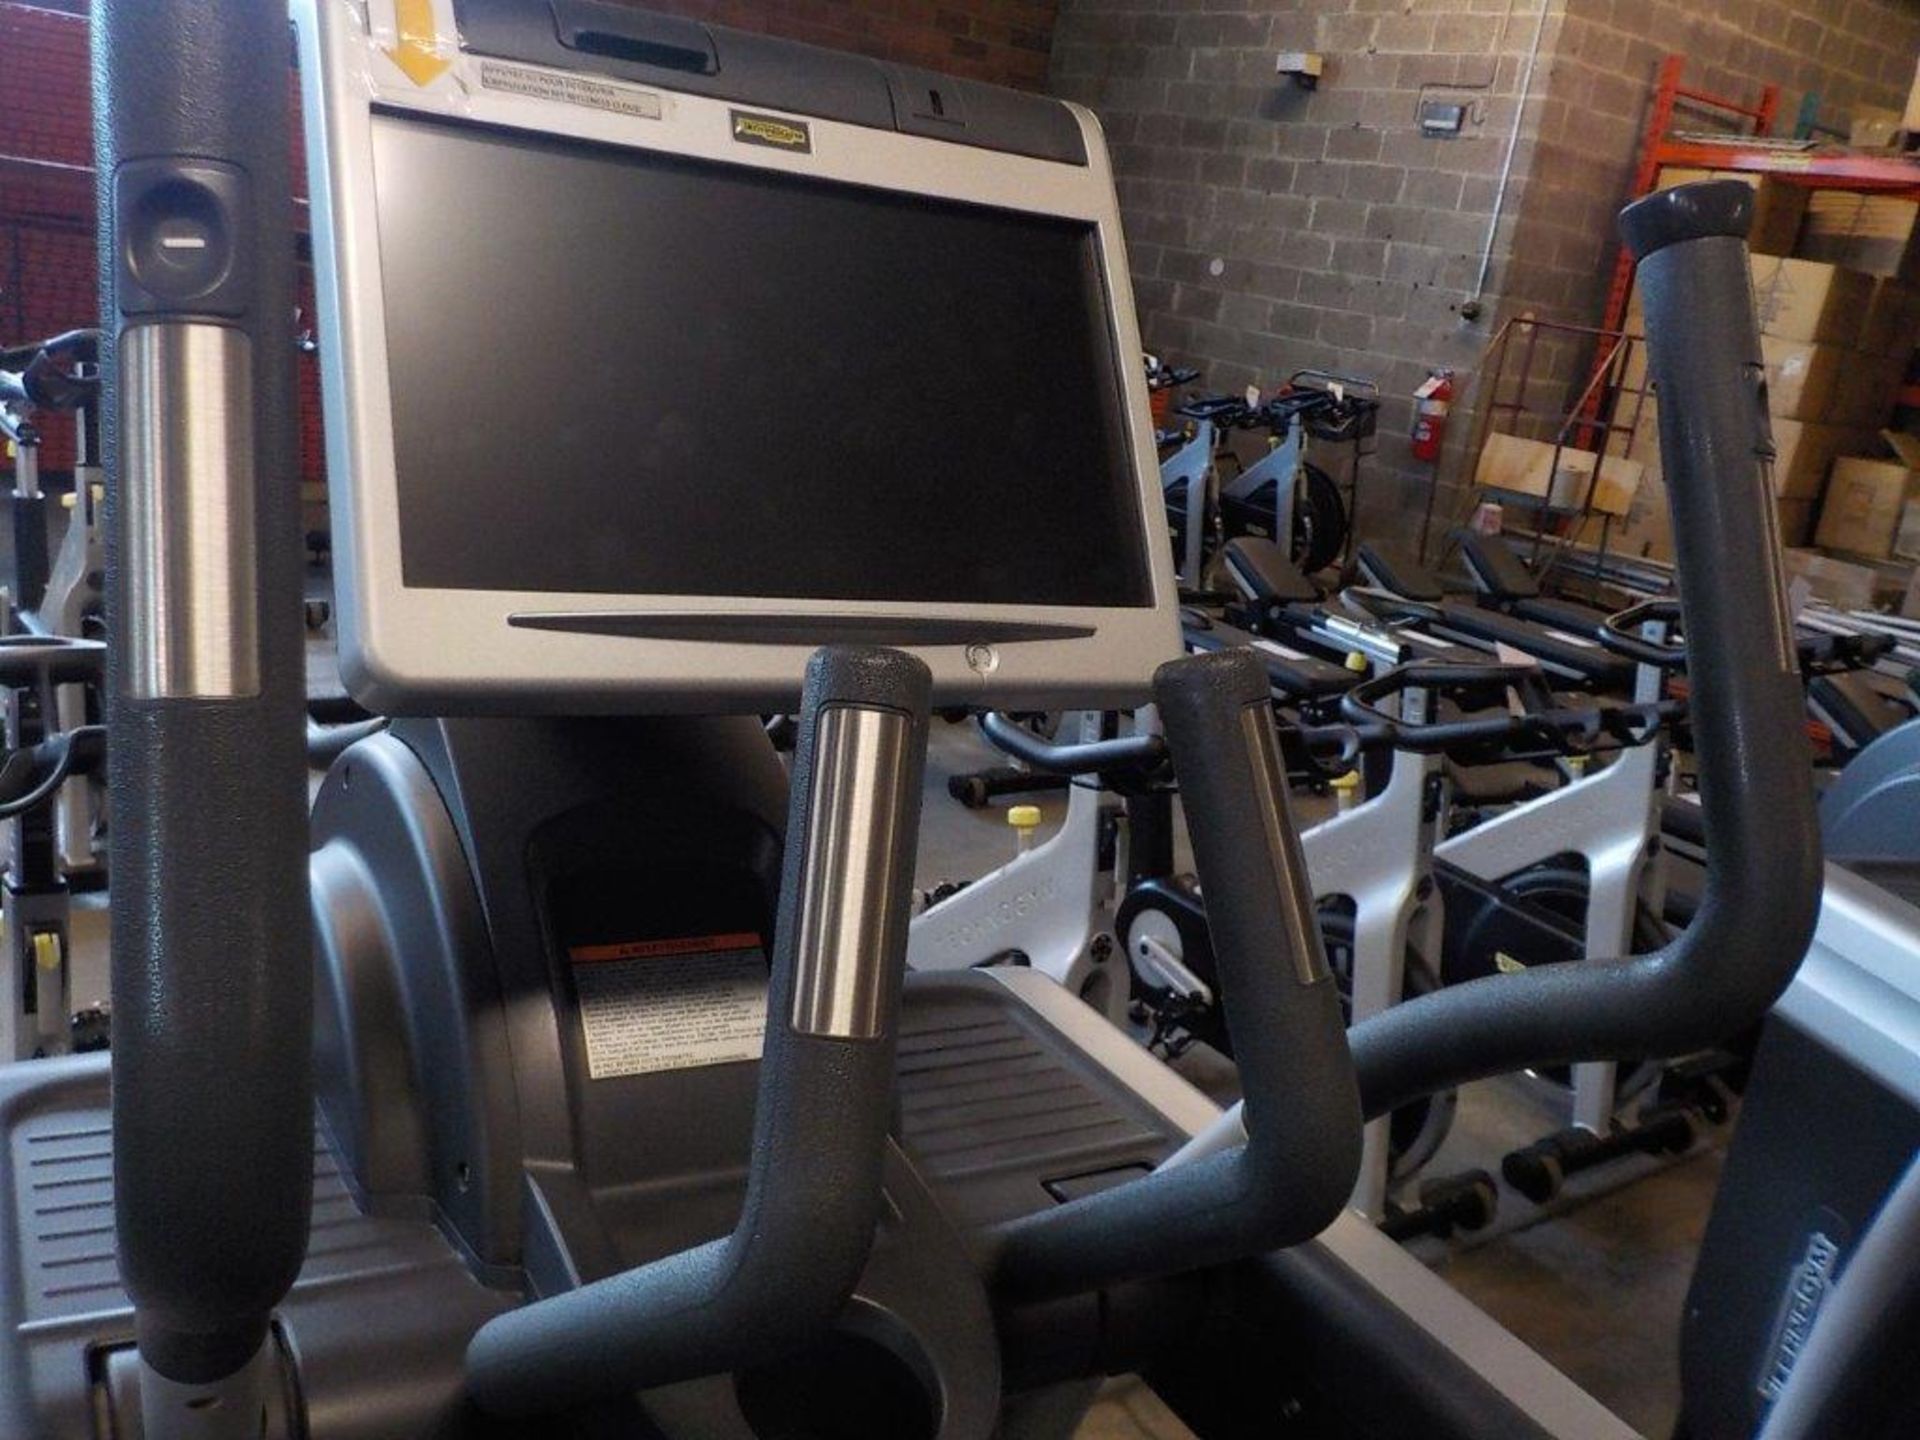 Excite COMMERCIAL TREADMILL - Image 3 of 3